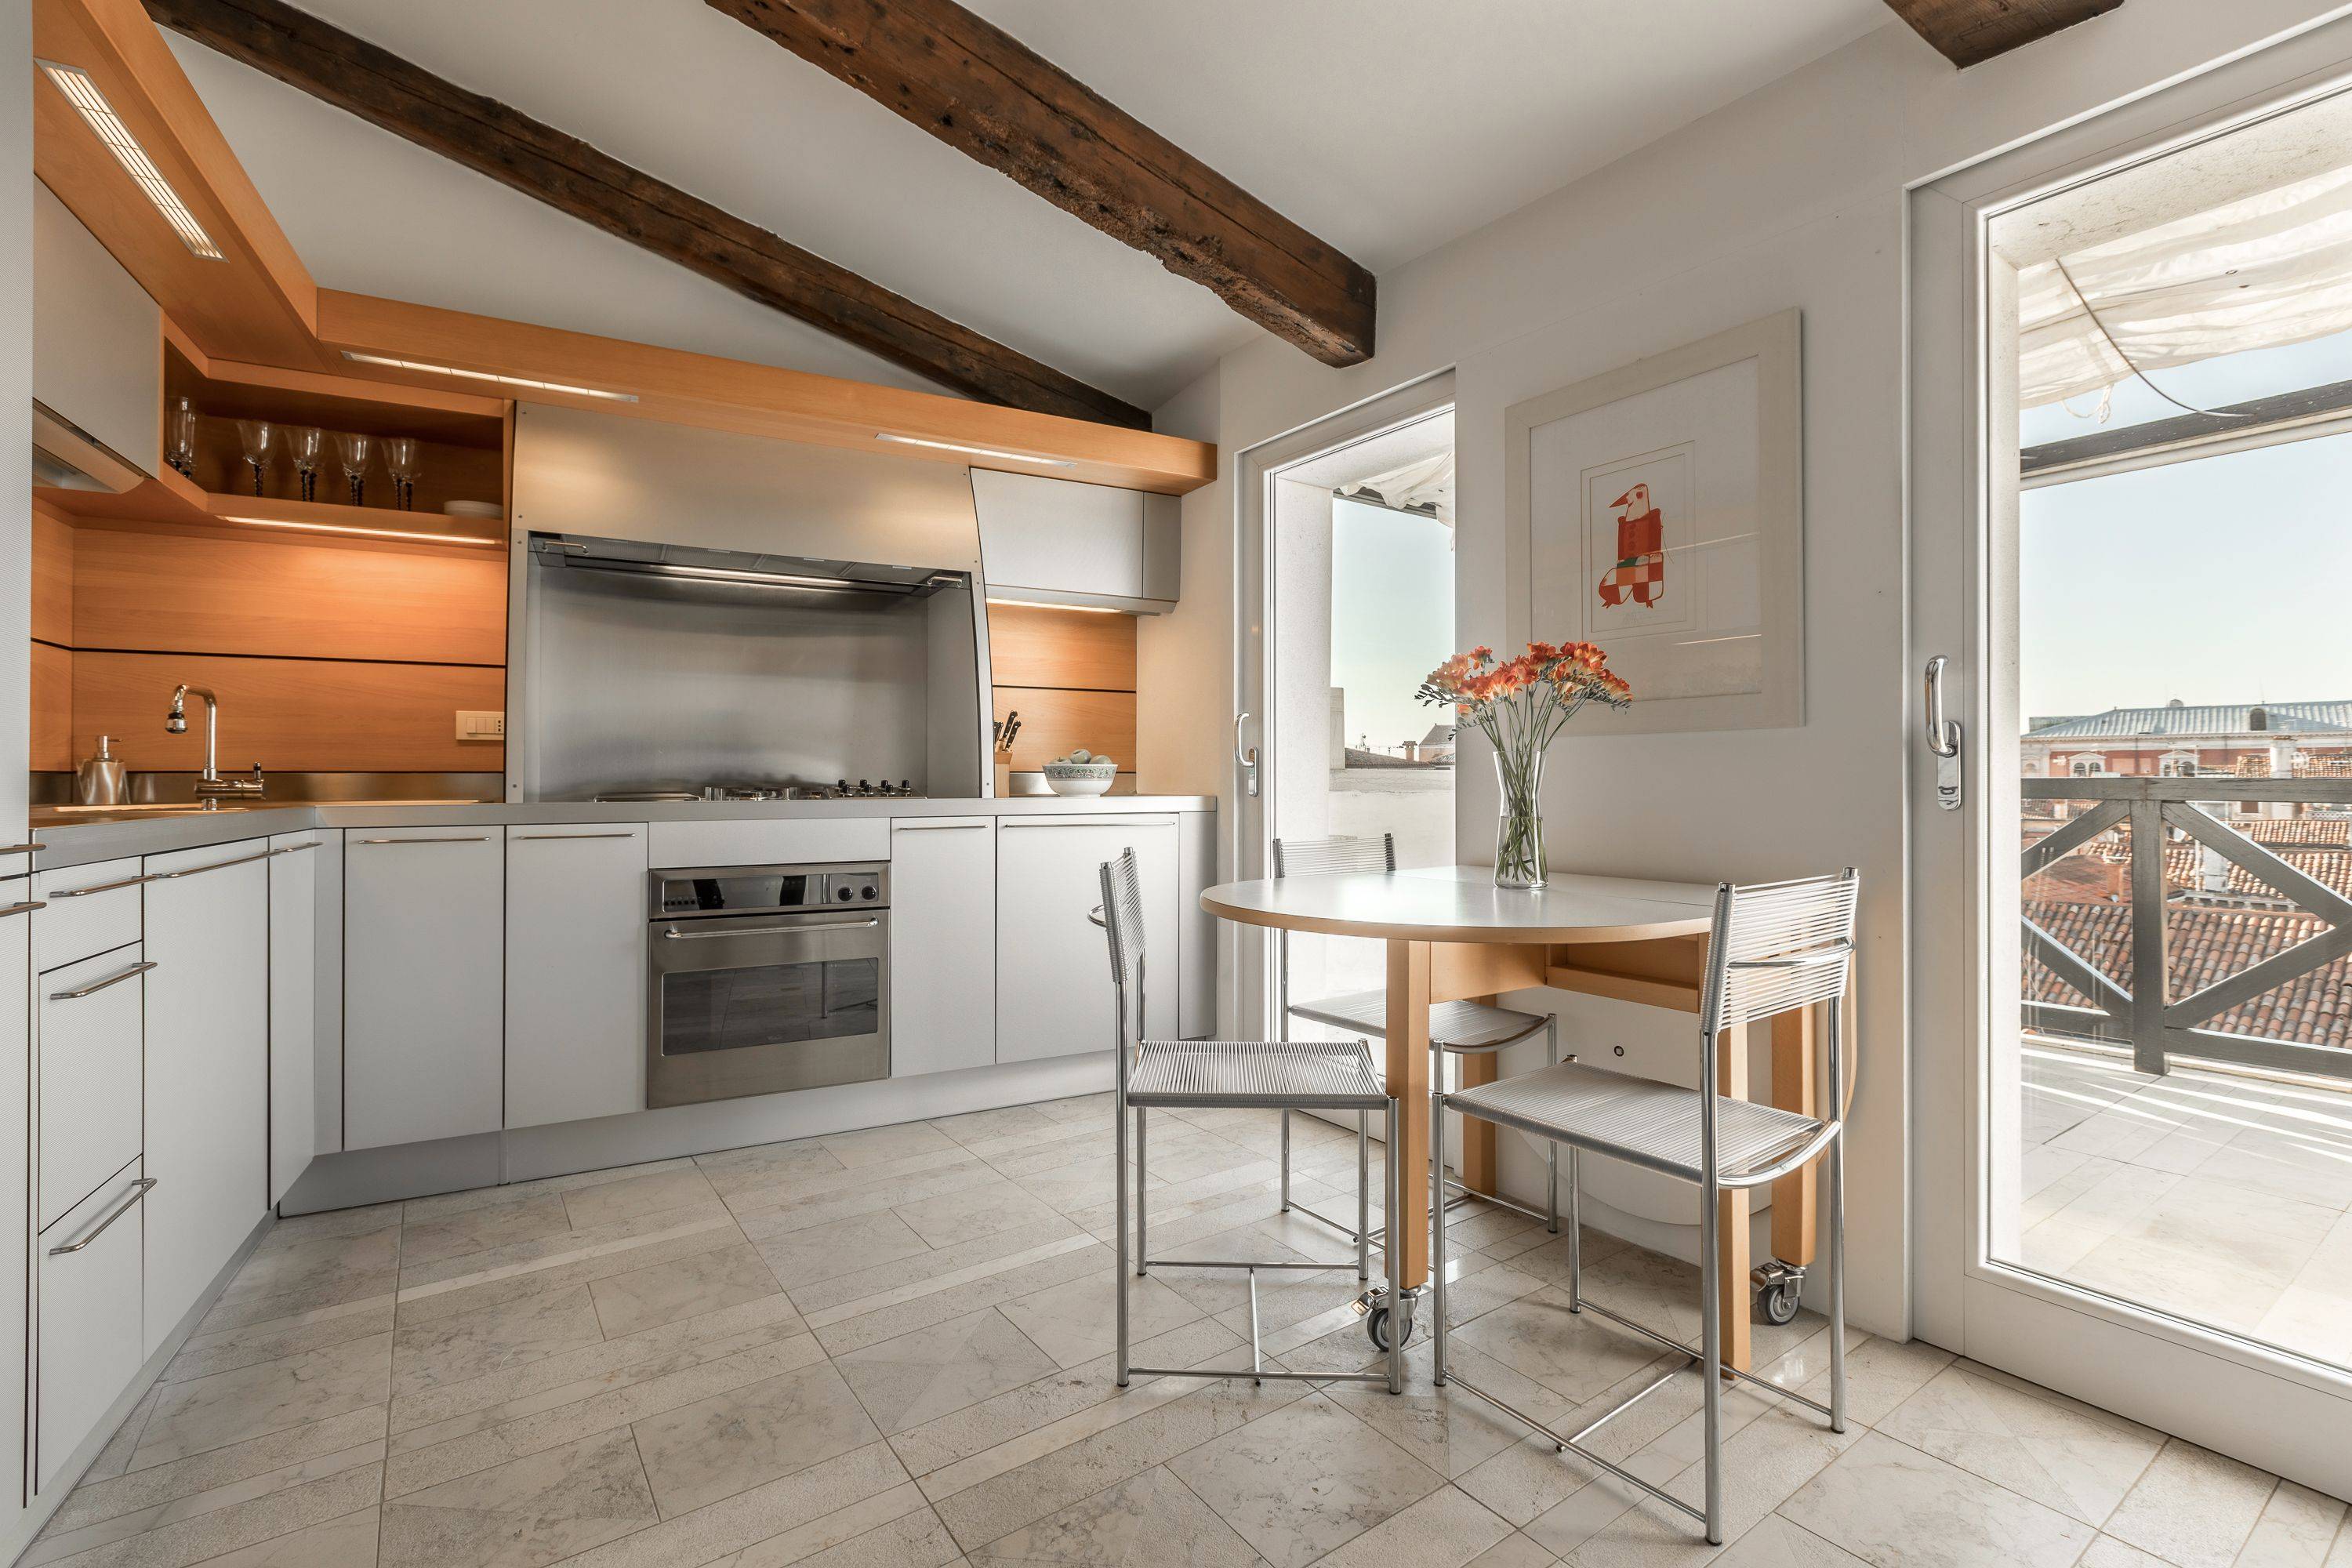 the spacious kitchen is found between the living room and the terrace